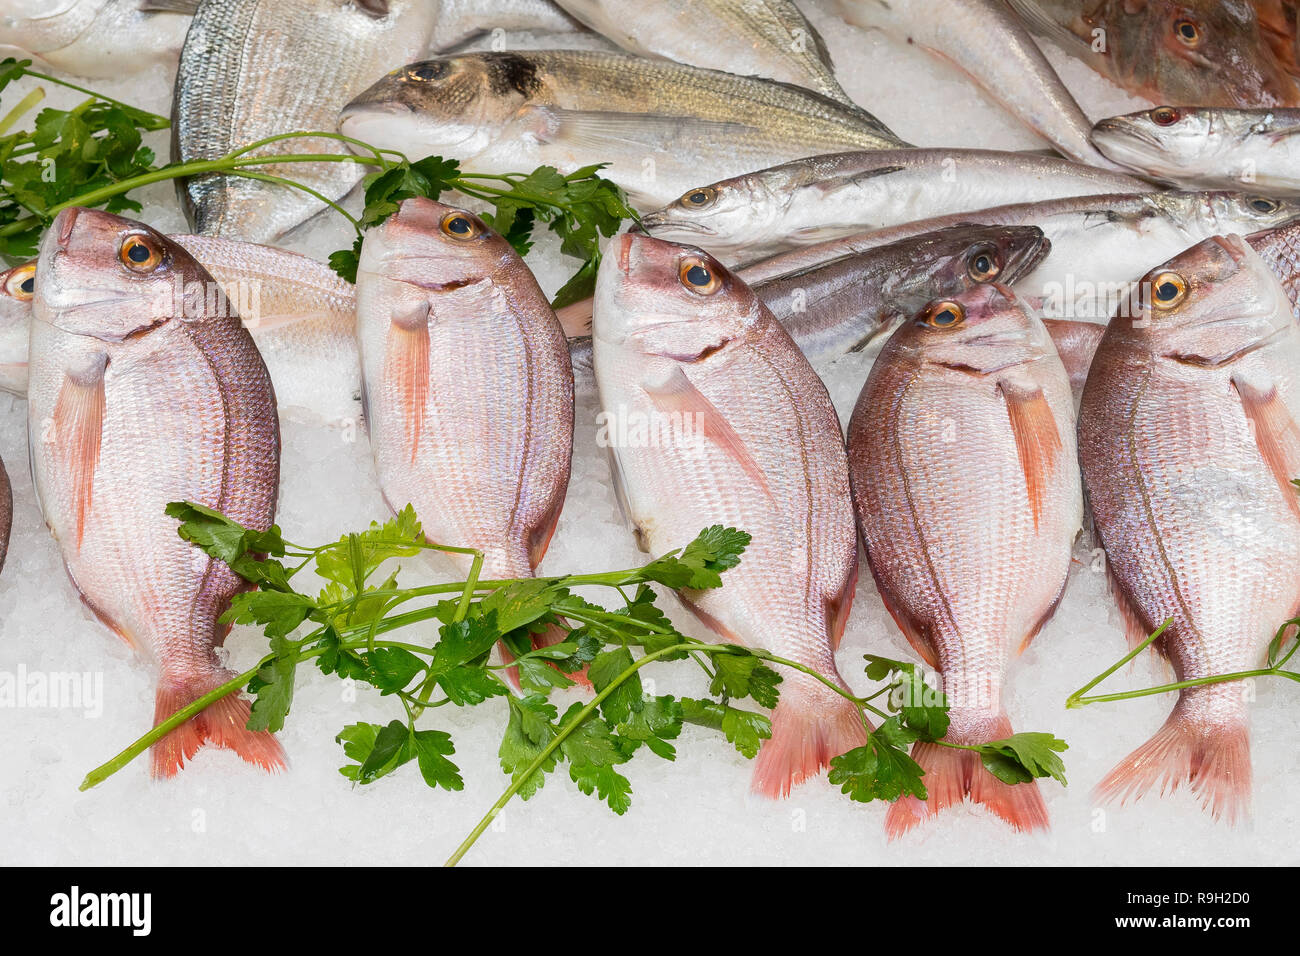 fresh common pandora (Pagellus erythrinus) on ice for sale at a fish market Stock Photo